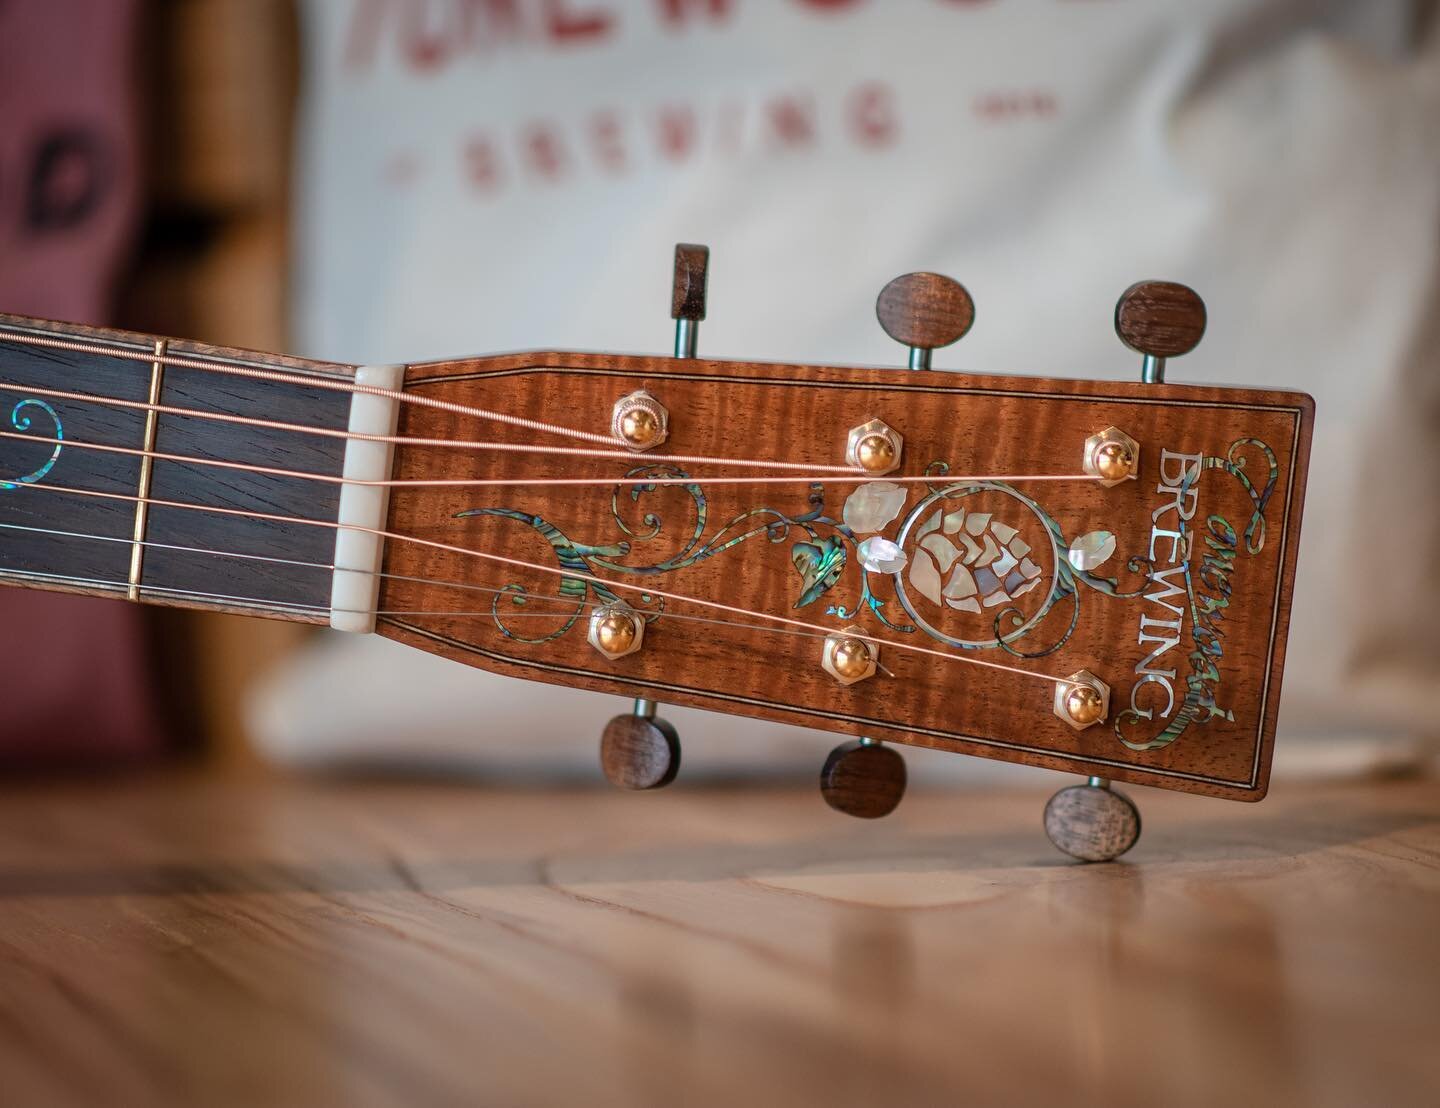 The @tonewoodbrewing D-42&rsquo;s headstock. On display at @artisanguitarshow April 14-16 in Harrisburg, PA. #luthier #luthiery #luthiermade #craftbeer #brewing #koa #oakbarrel #acousticguitar #tonewood